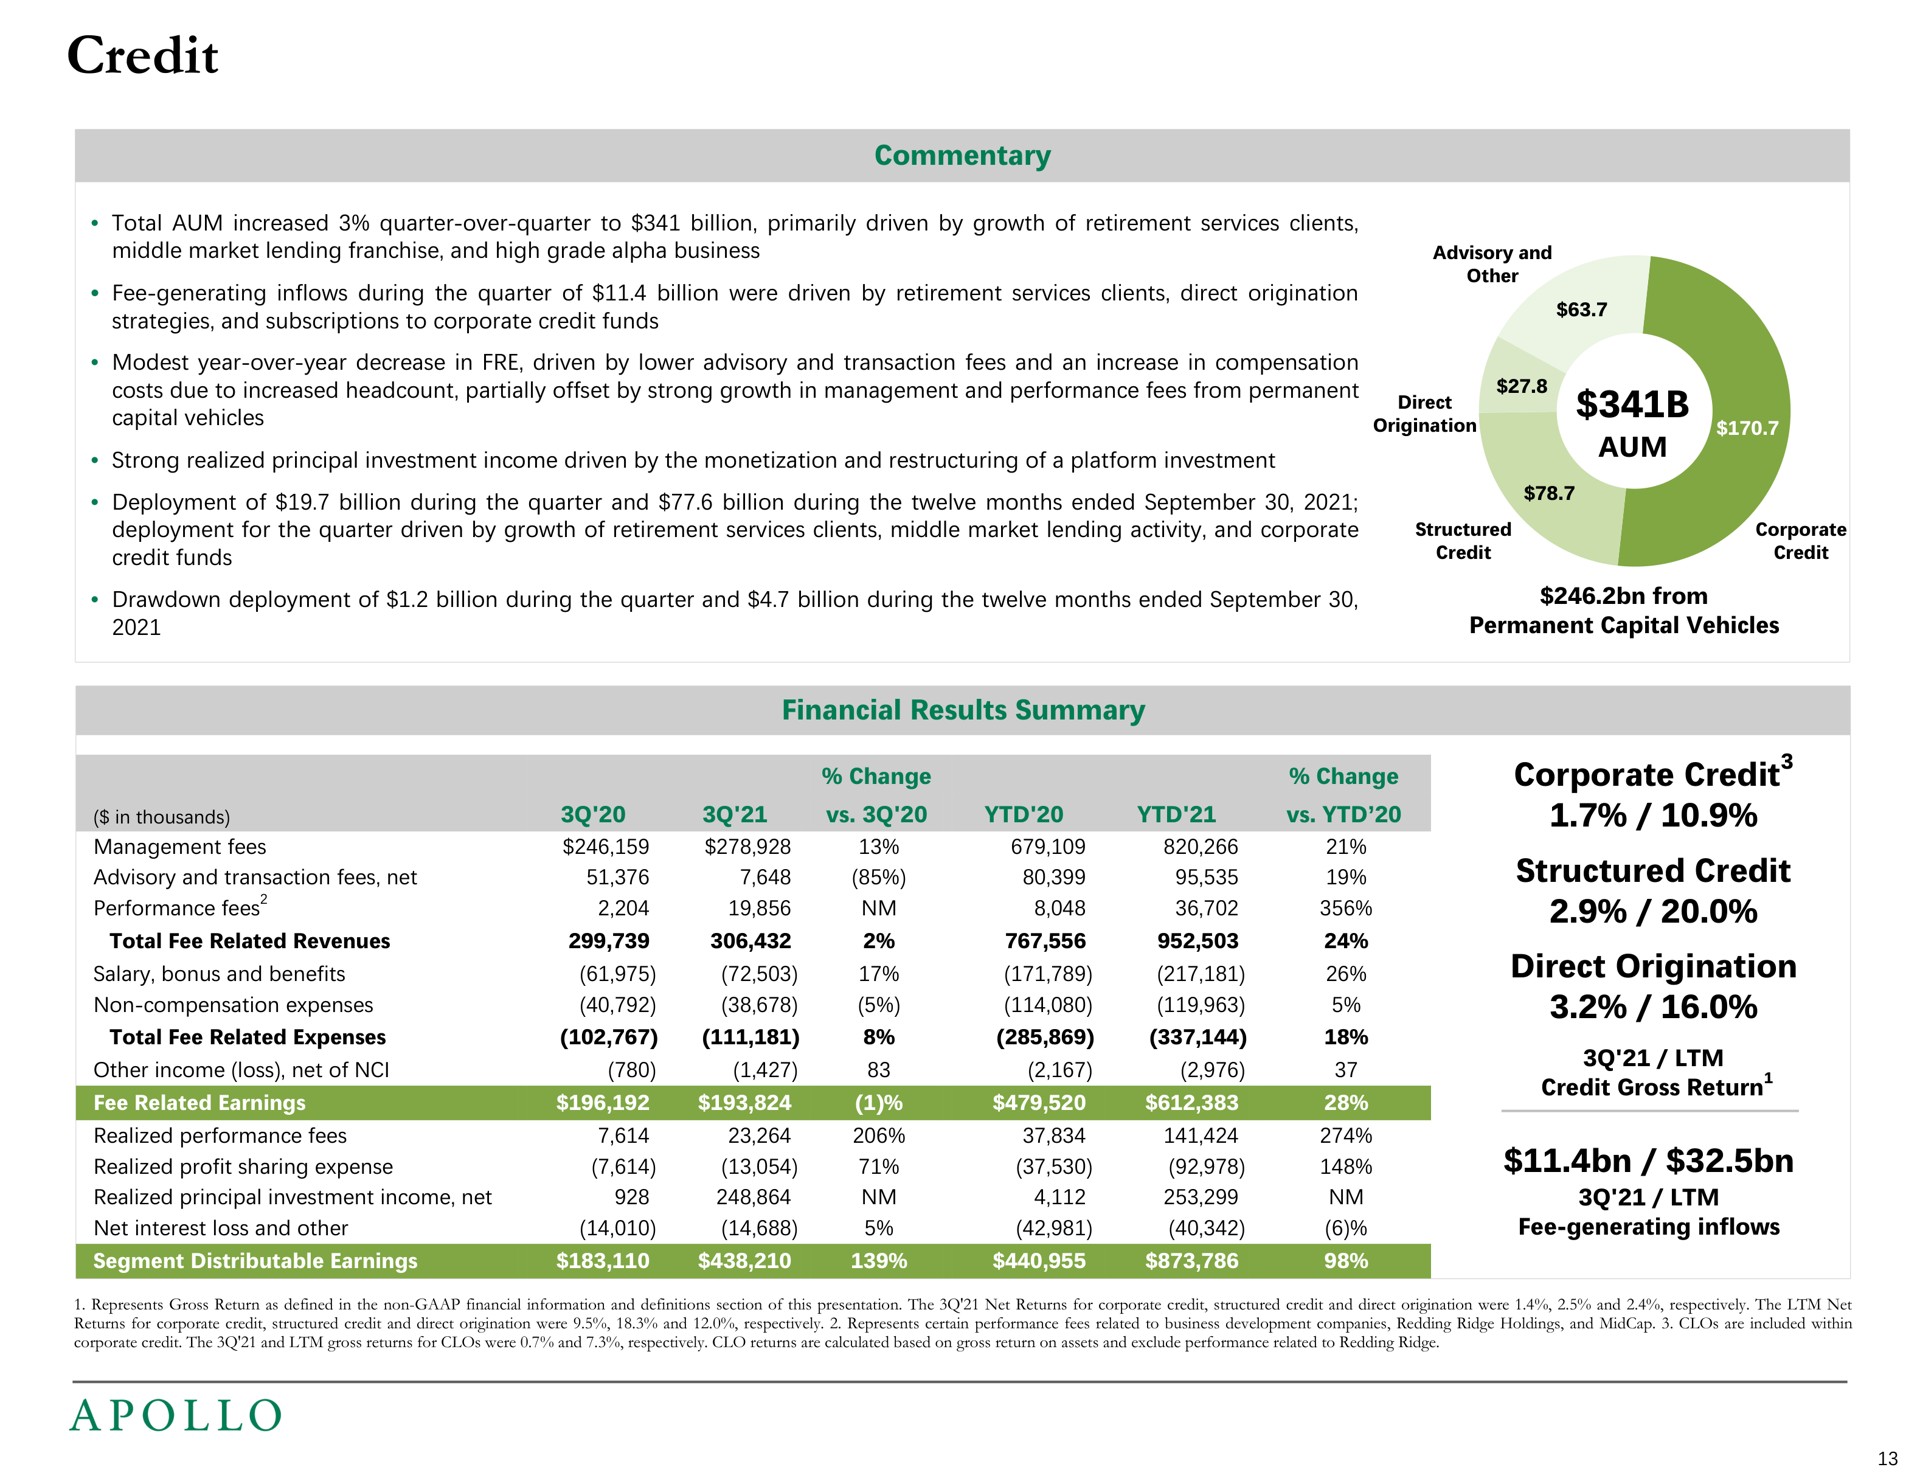 credit corporate credit structured credit direct origination performance fees other income loss net of realized profit sharing expense | Apollo Global Management